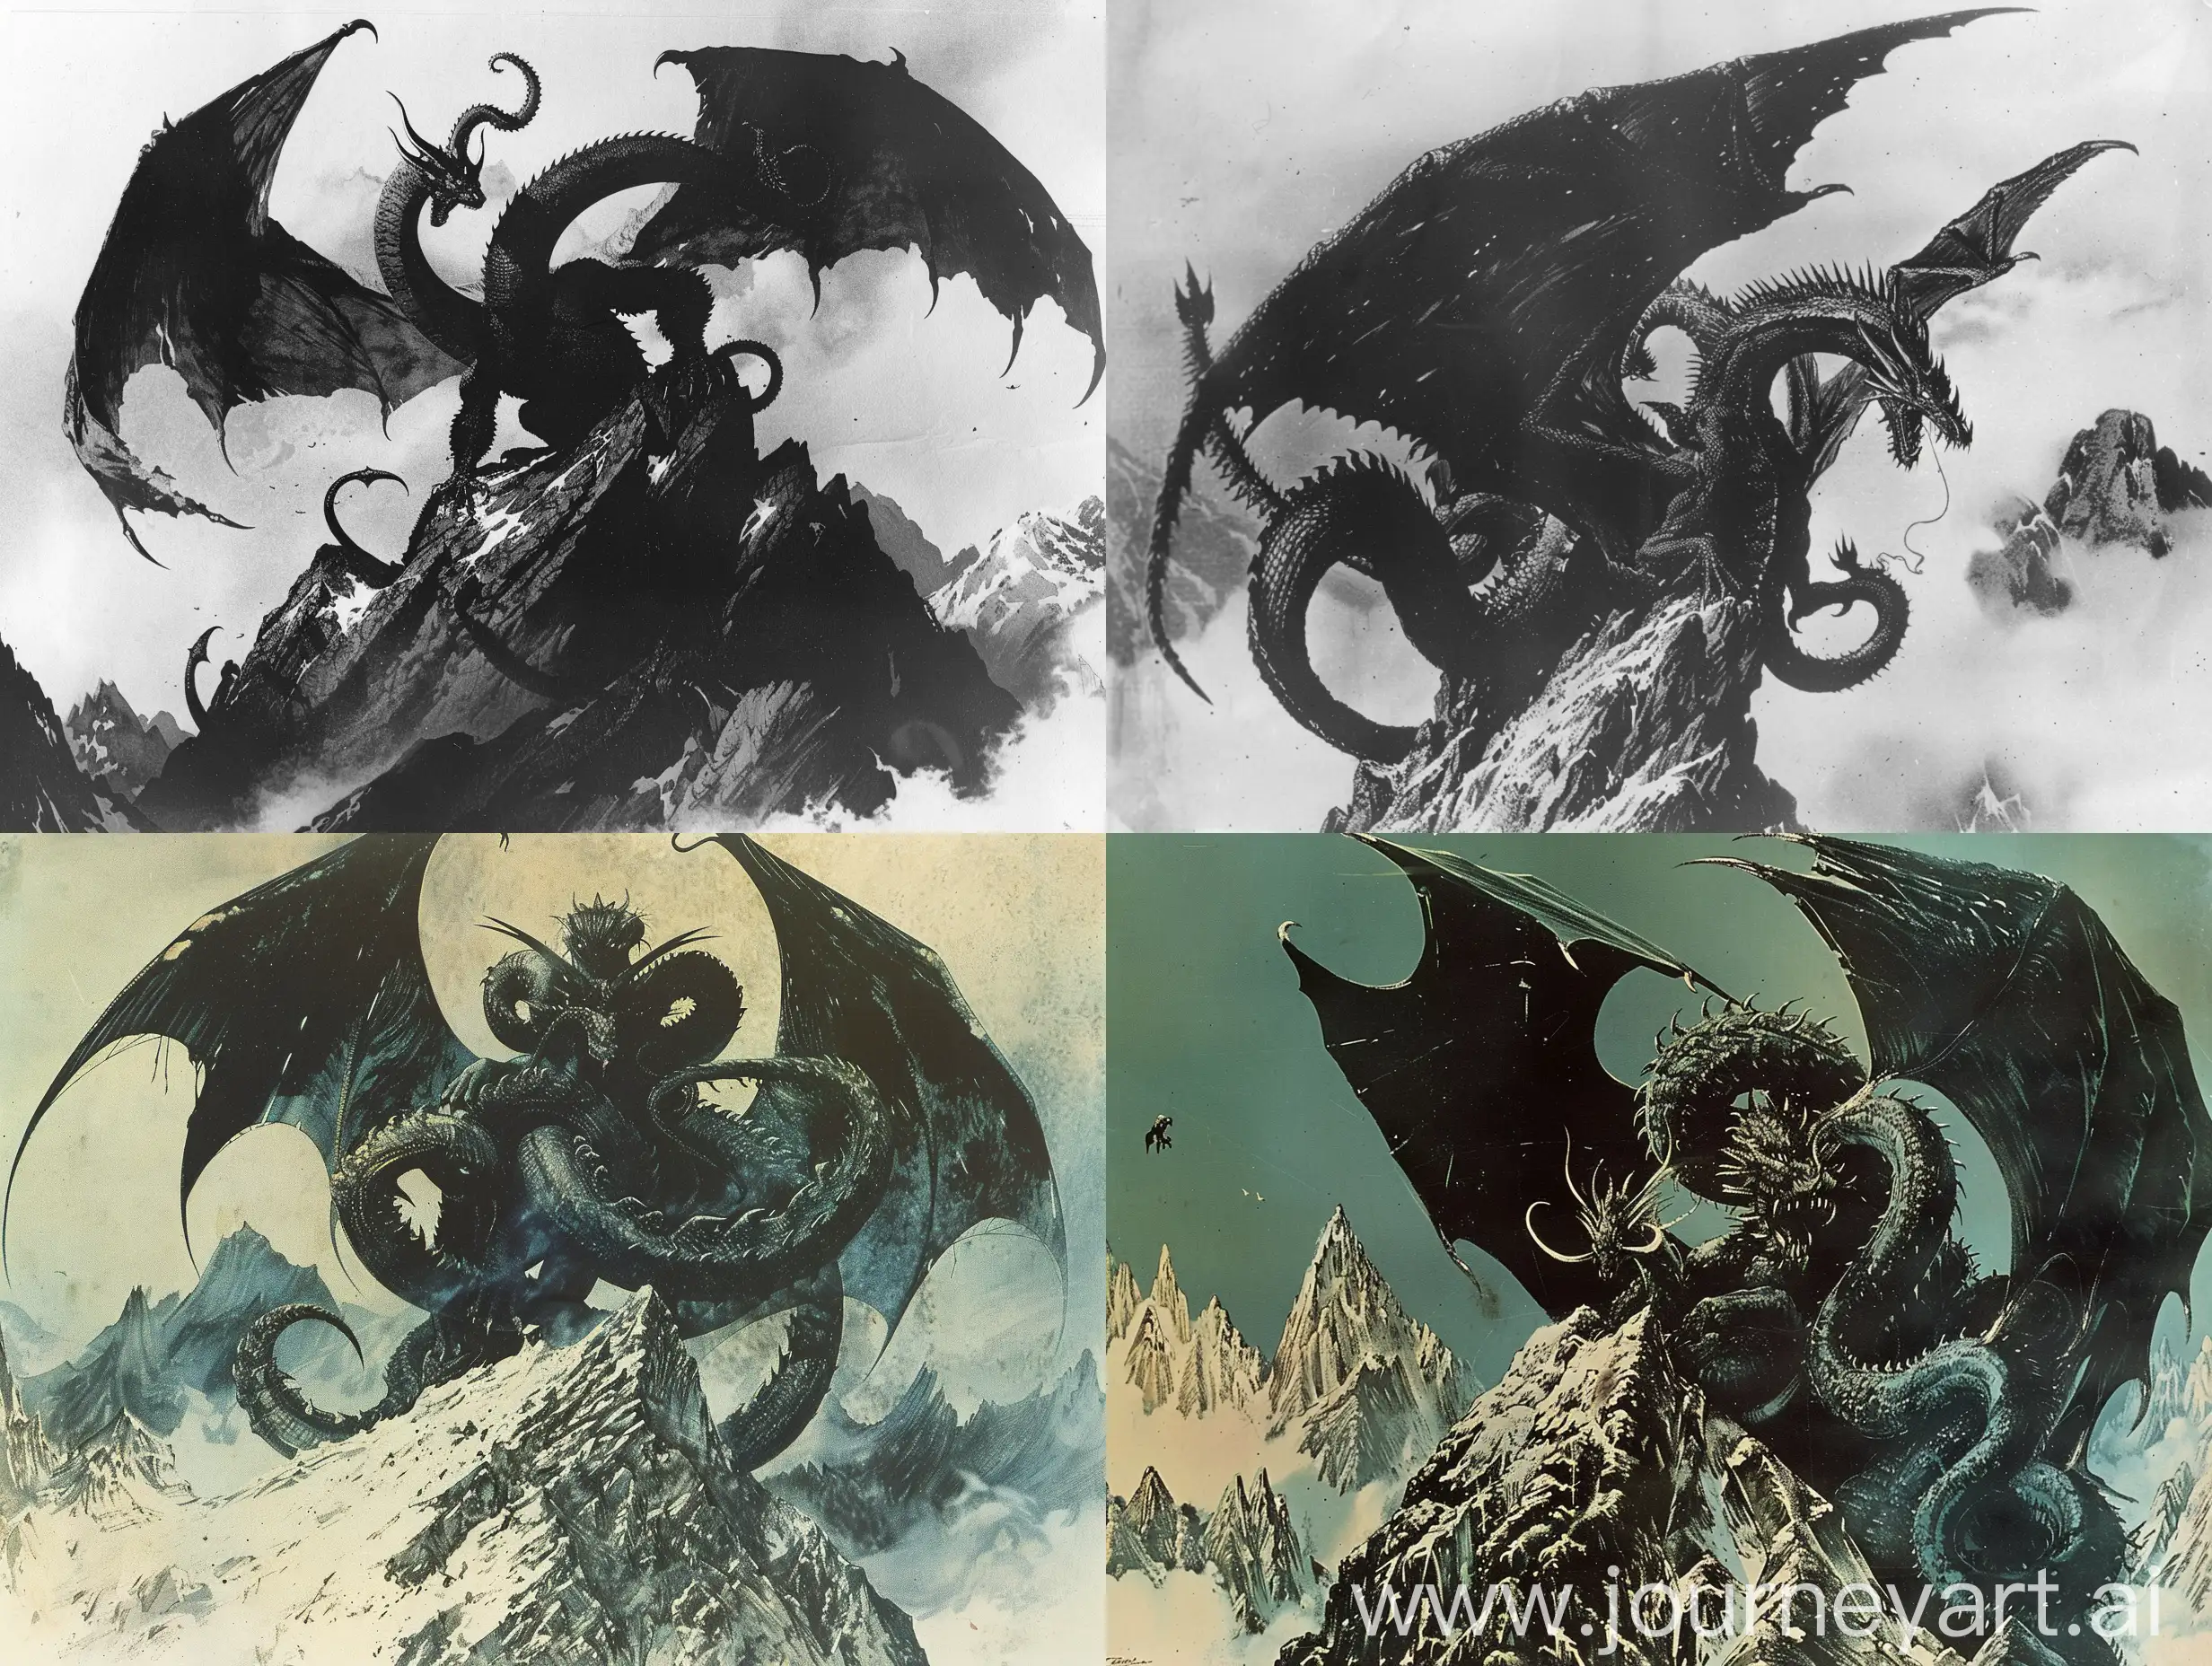 1970's dark fantasy book illustration. On a mountain peak, a huge black Hydra, with its two large wings and several heads.